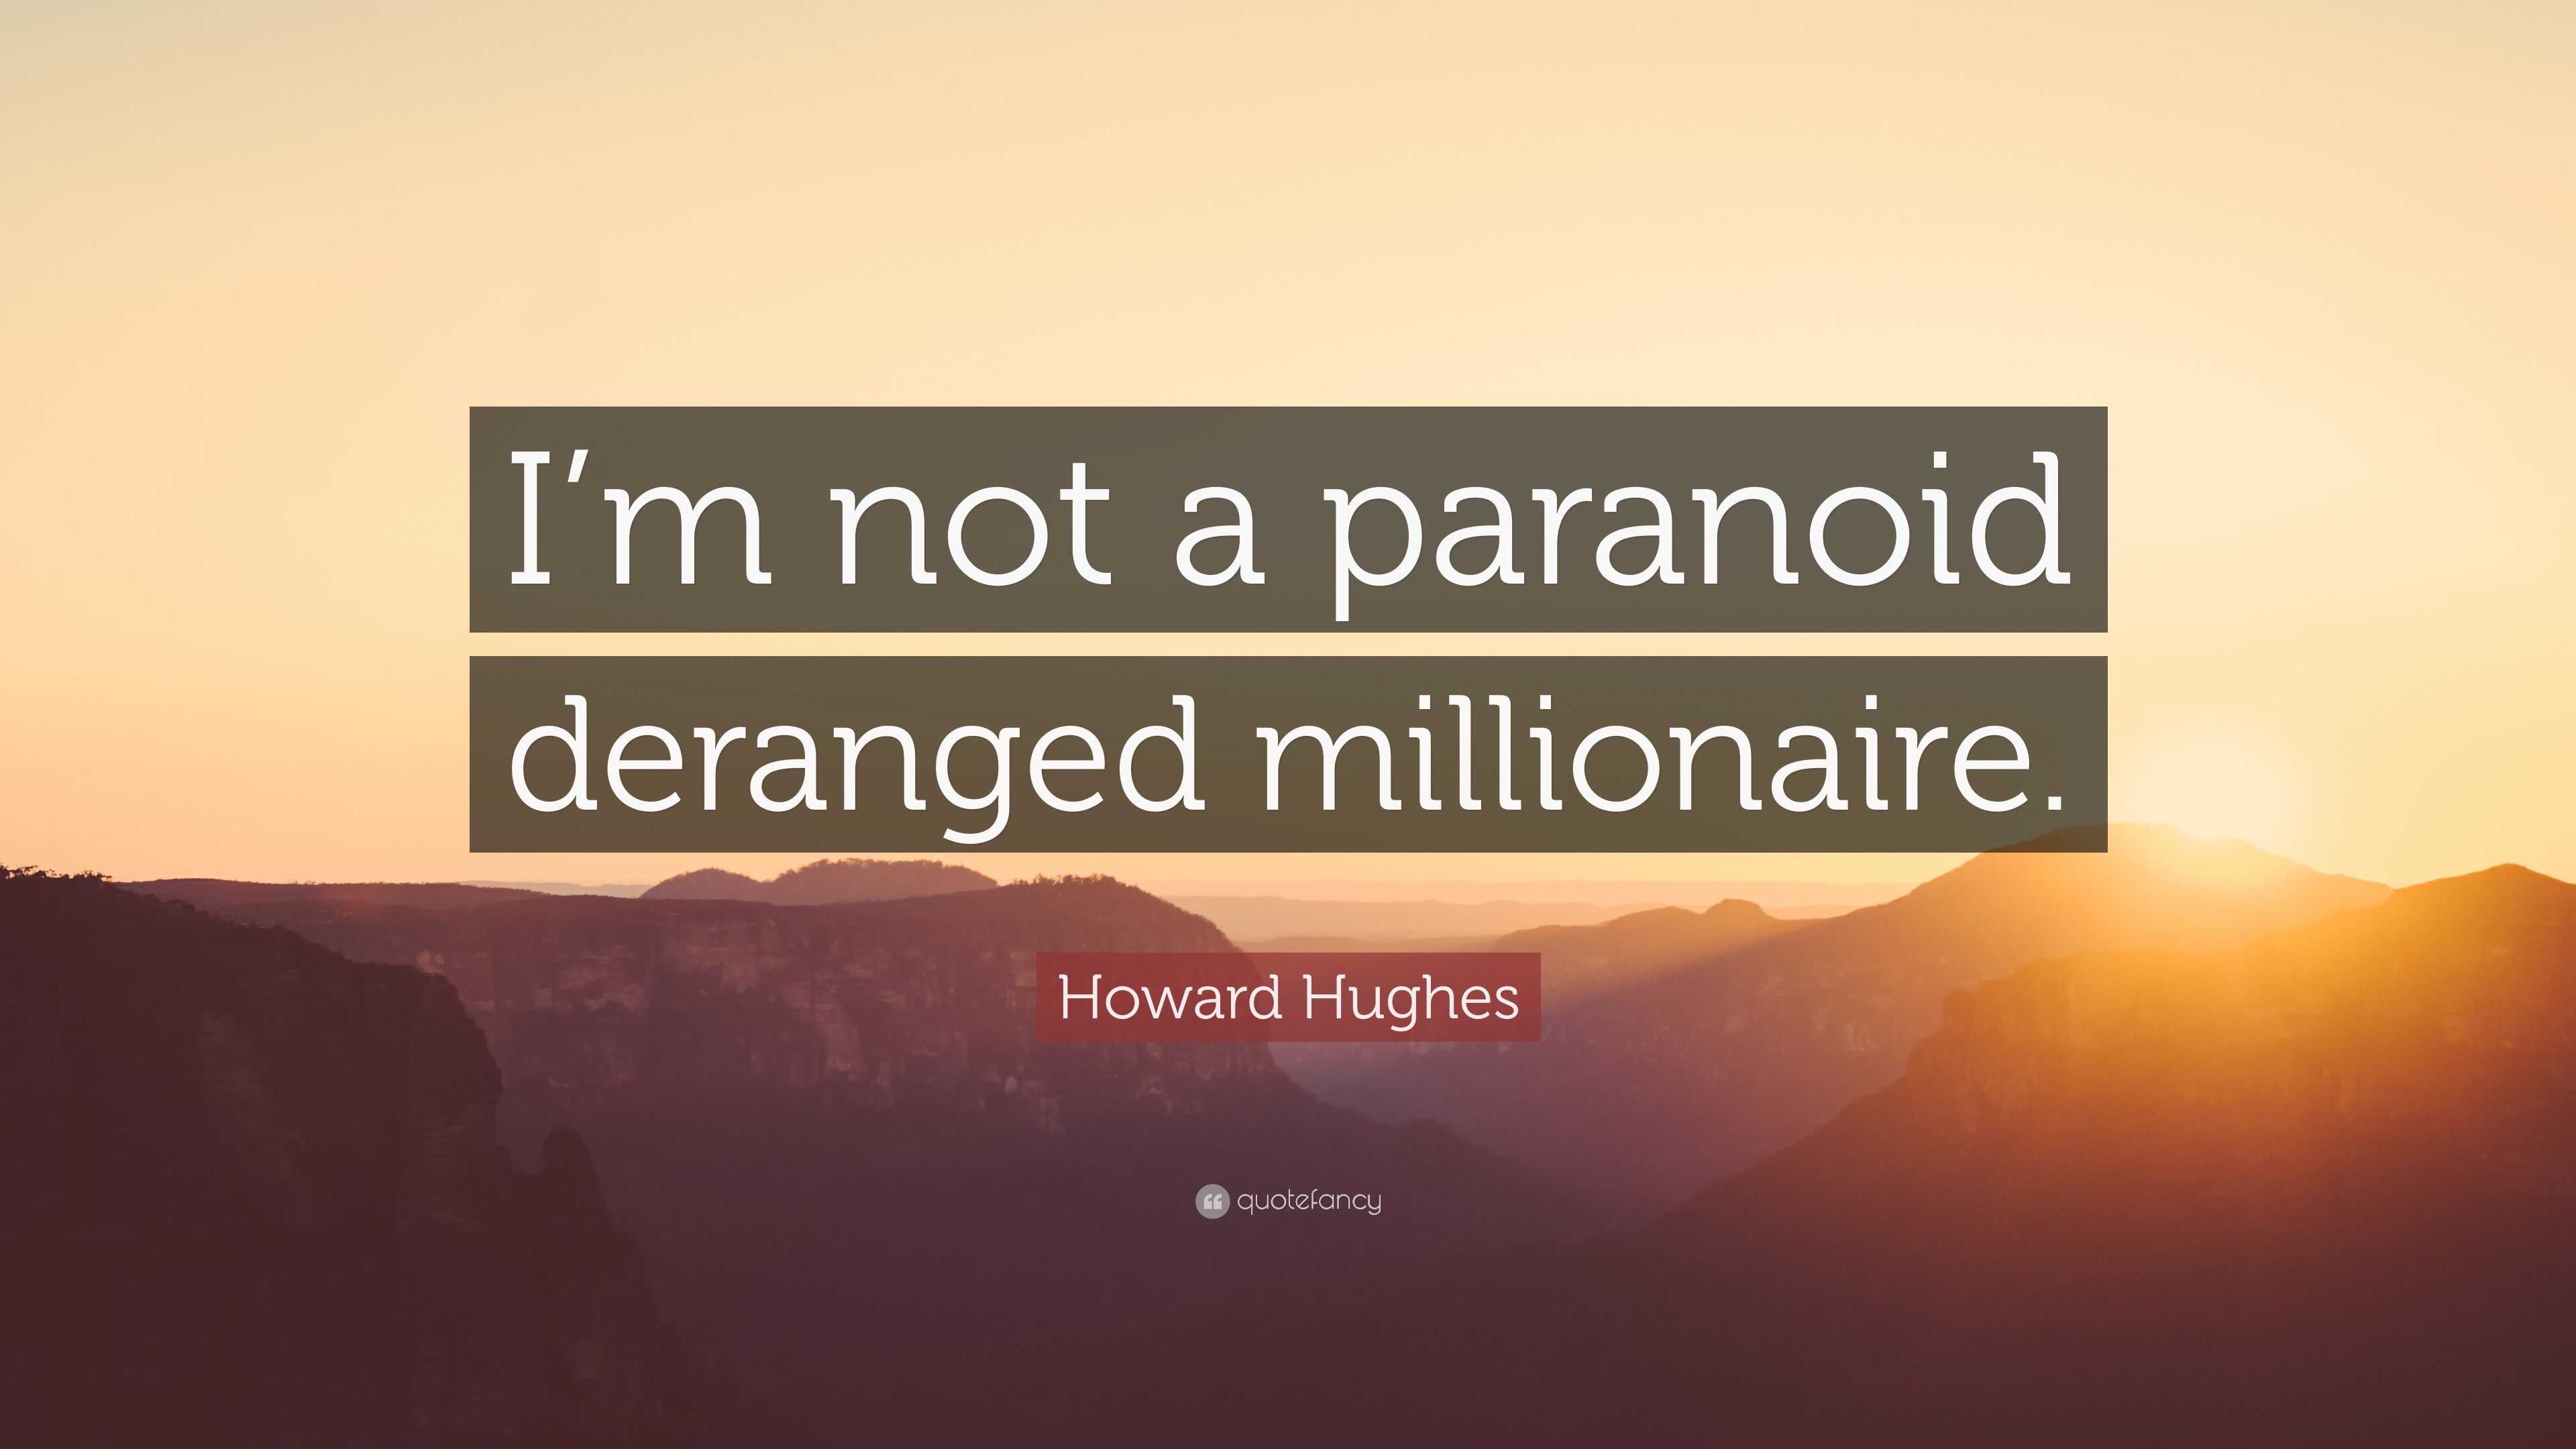 3840x2160 Howard Hughes Quote: “I'm not a paranoid deranged millionaire.”